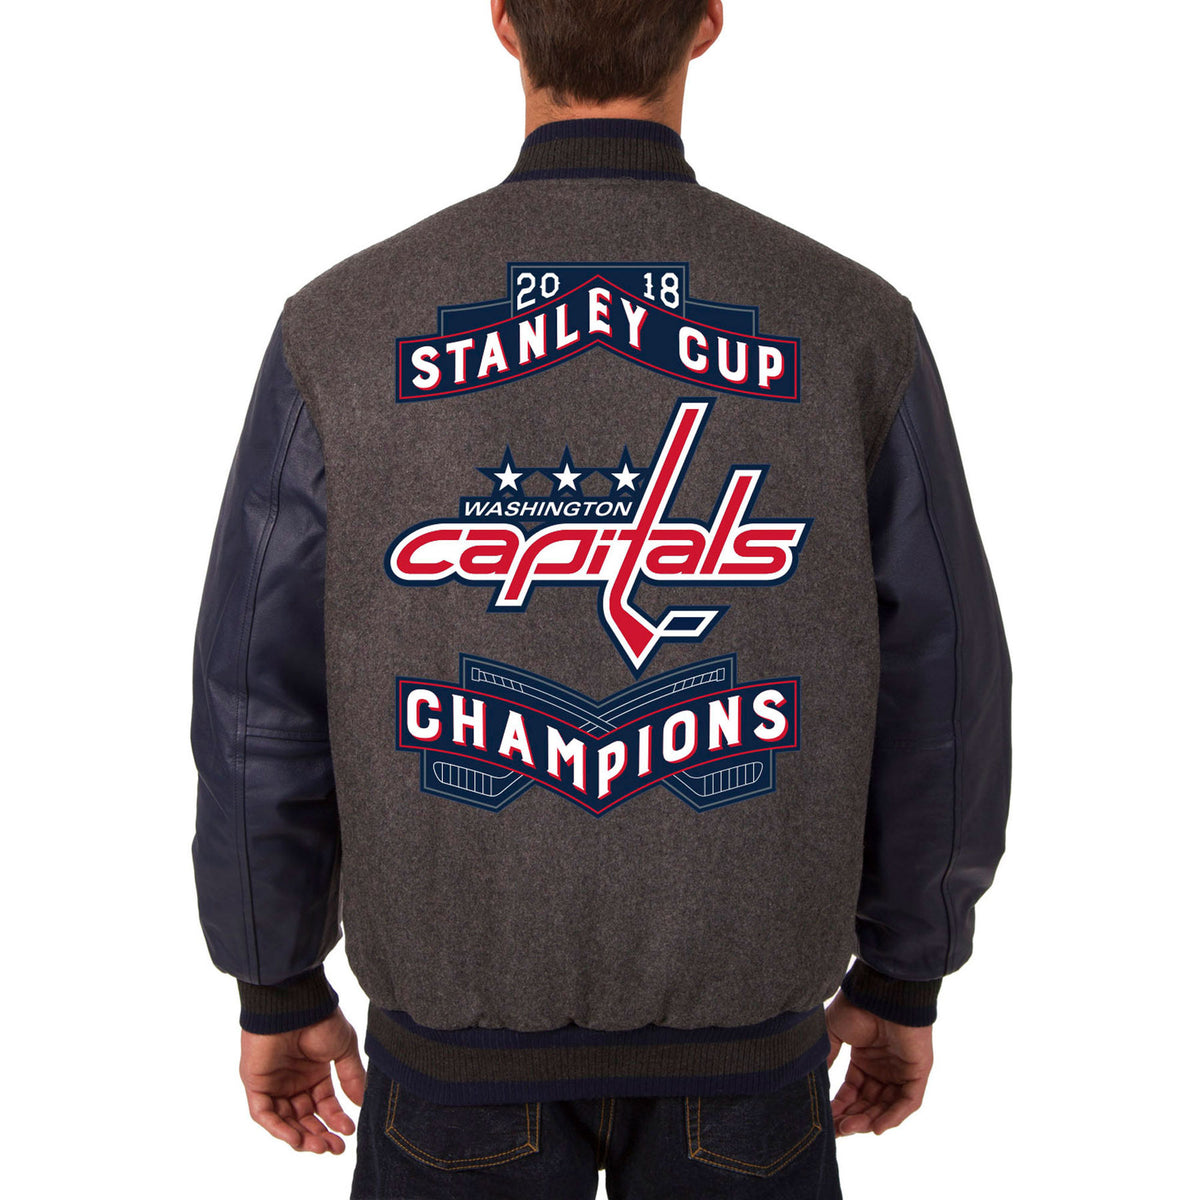 Washington Capitals JH Design 2018 Stanley Cup Champions Wool & Leather Jacket – Charcoal Medium